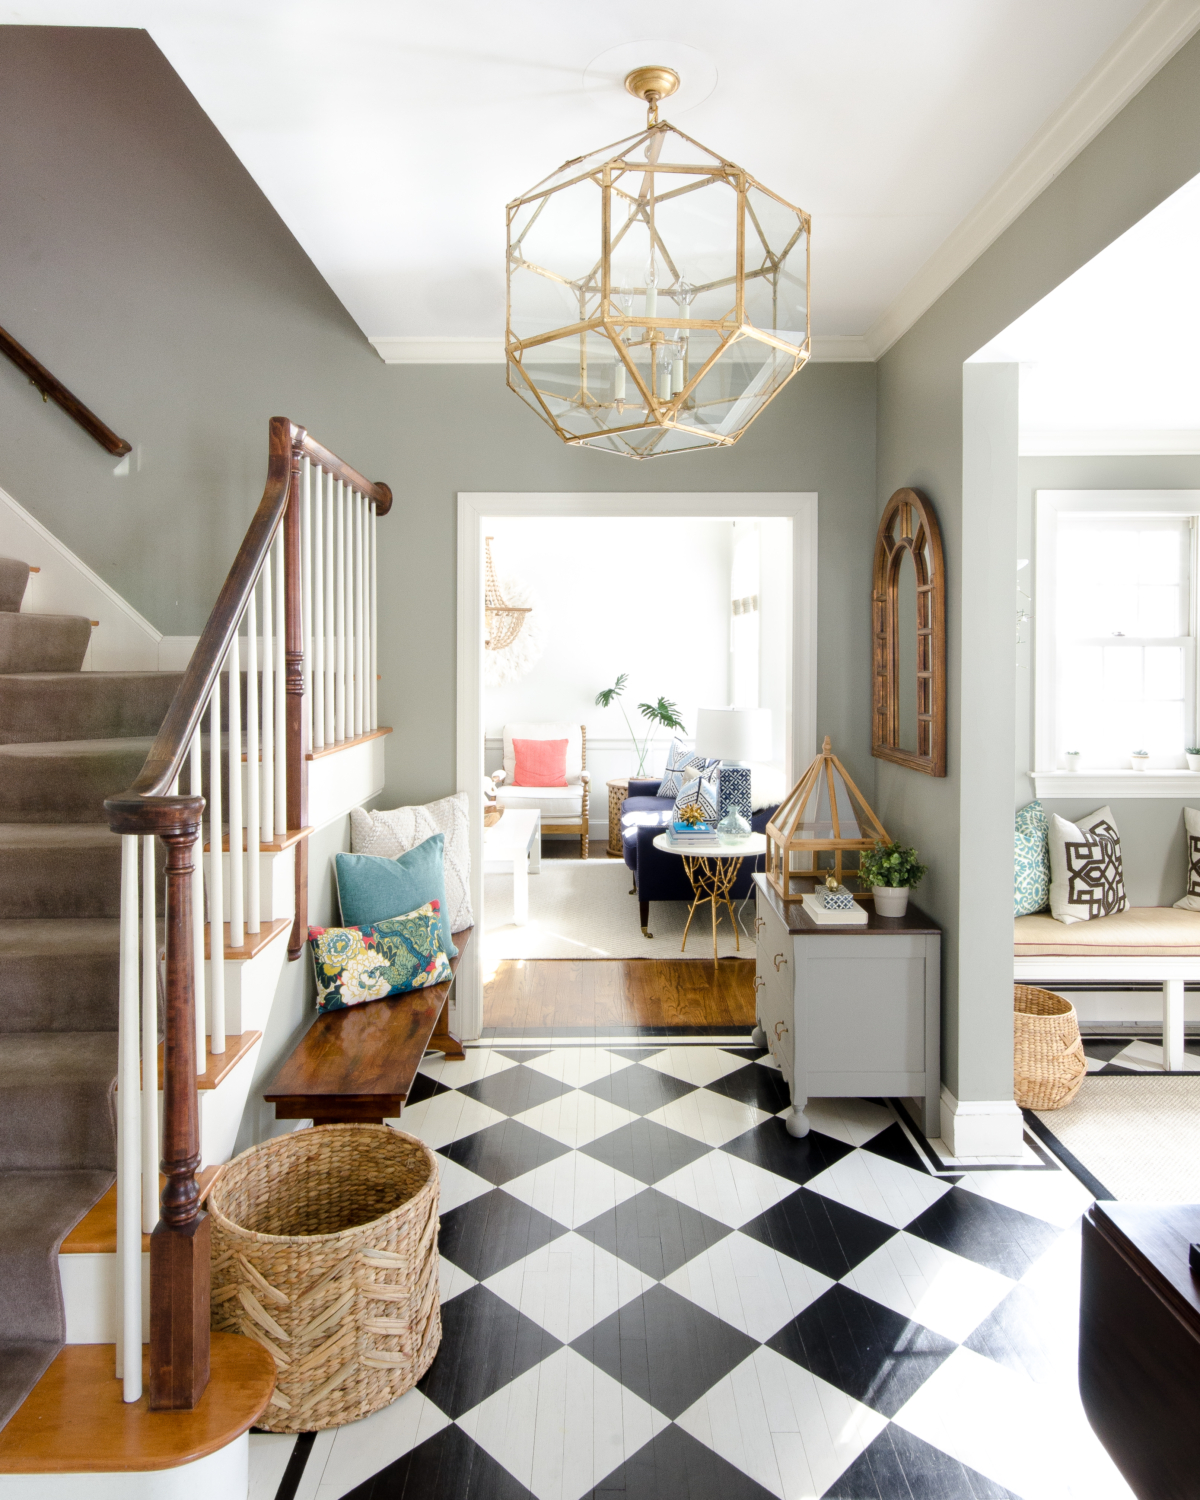 A stunning gold entryway light that is a dread ringer for the Circa Lighting Morris Lantern but at about a third of the price! Checkered floors and simple accents complete the updated classic look of this entry.